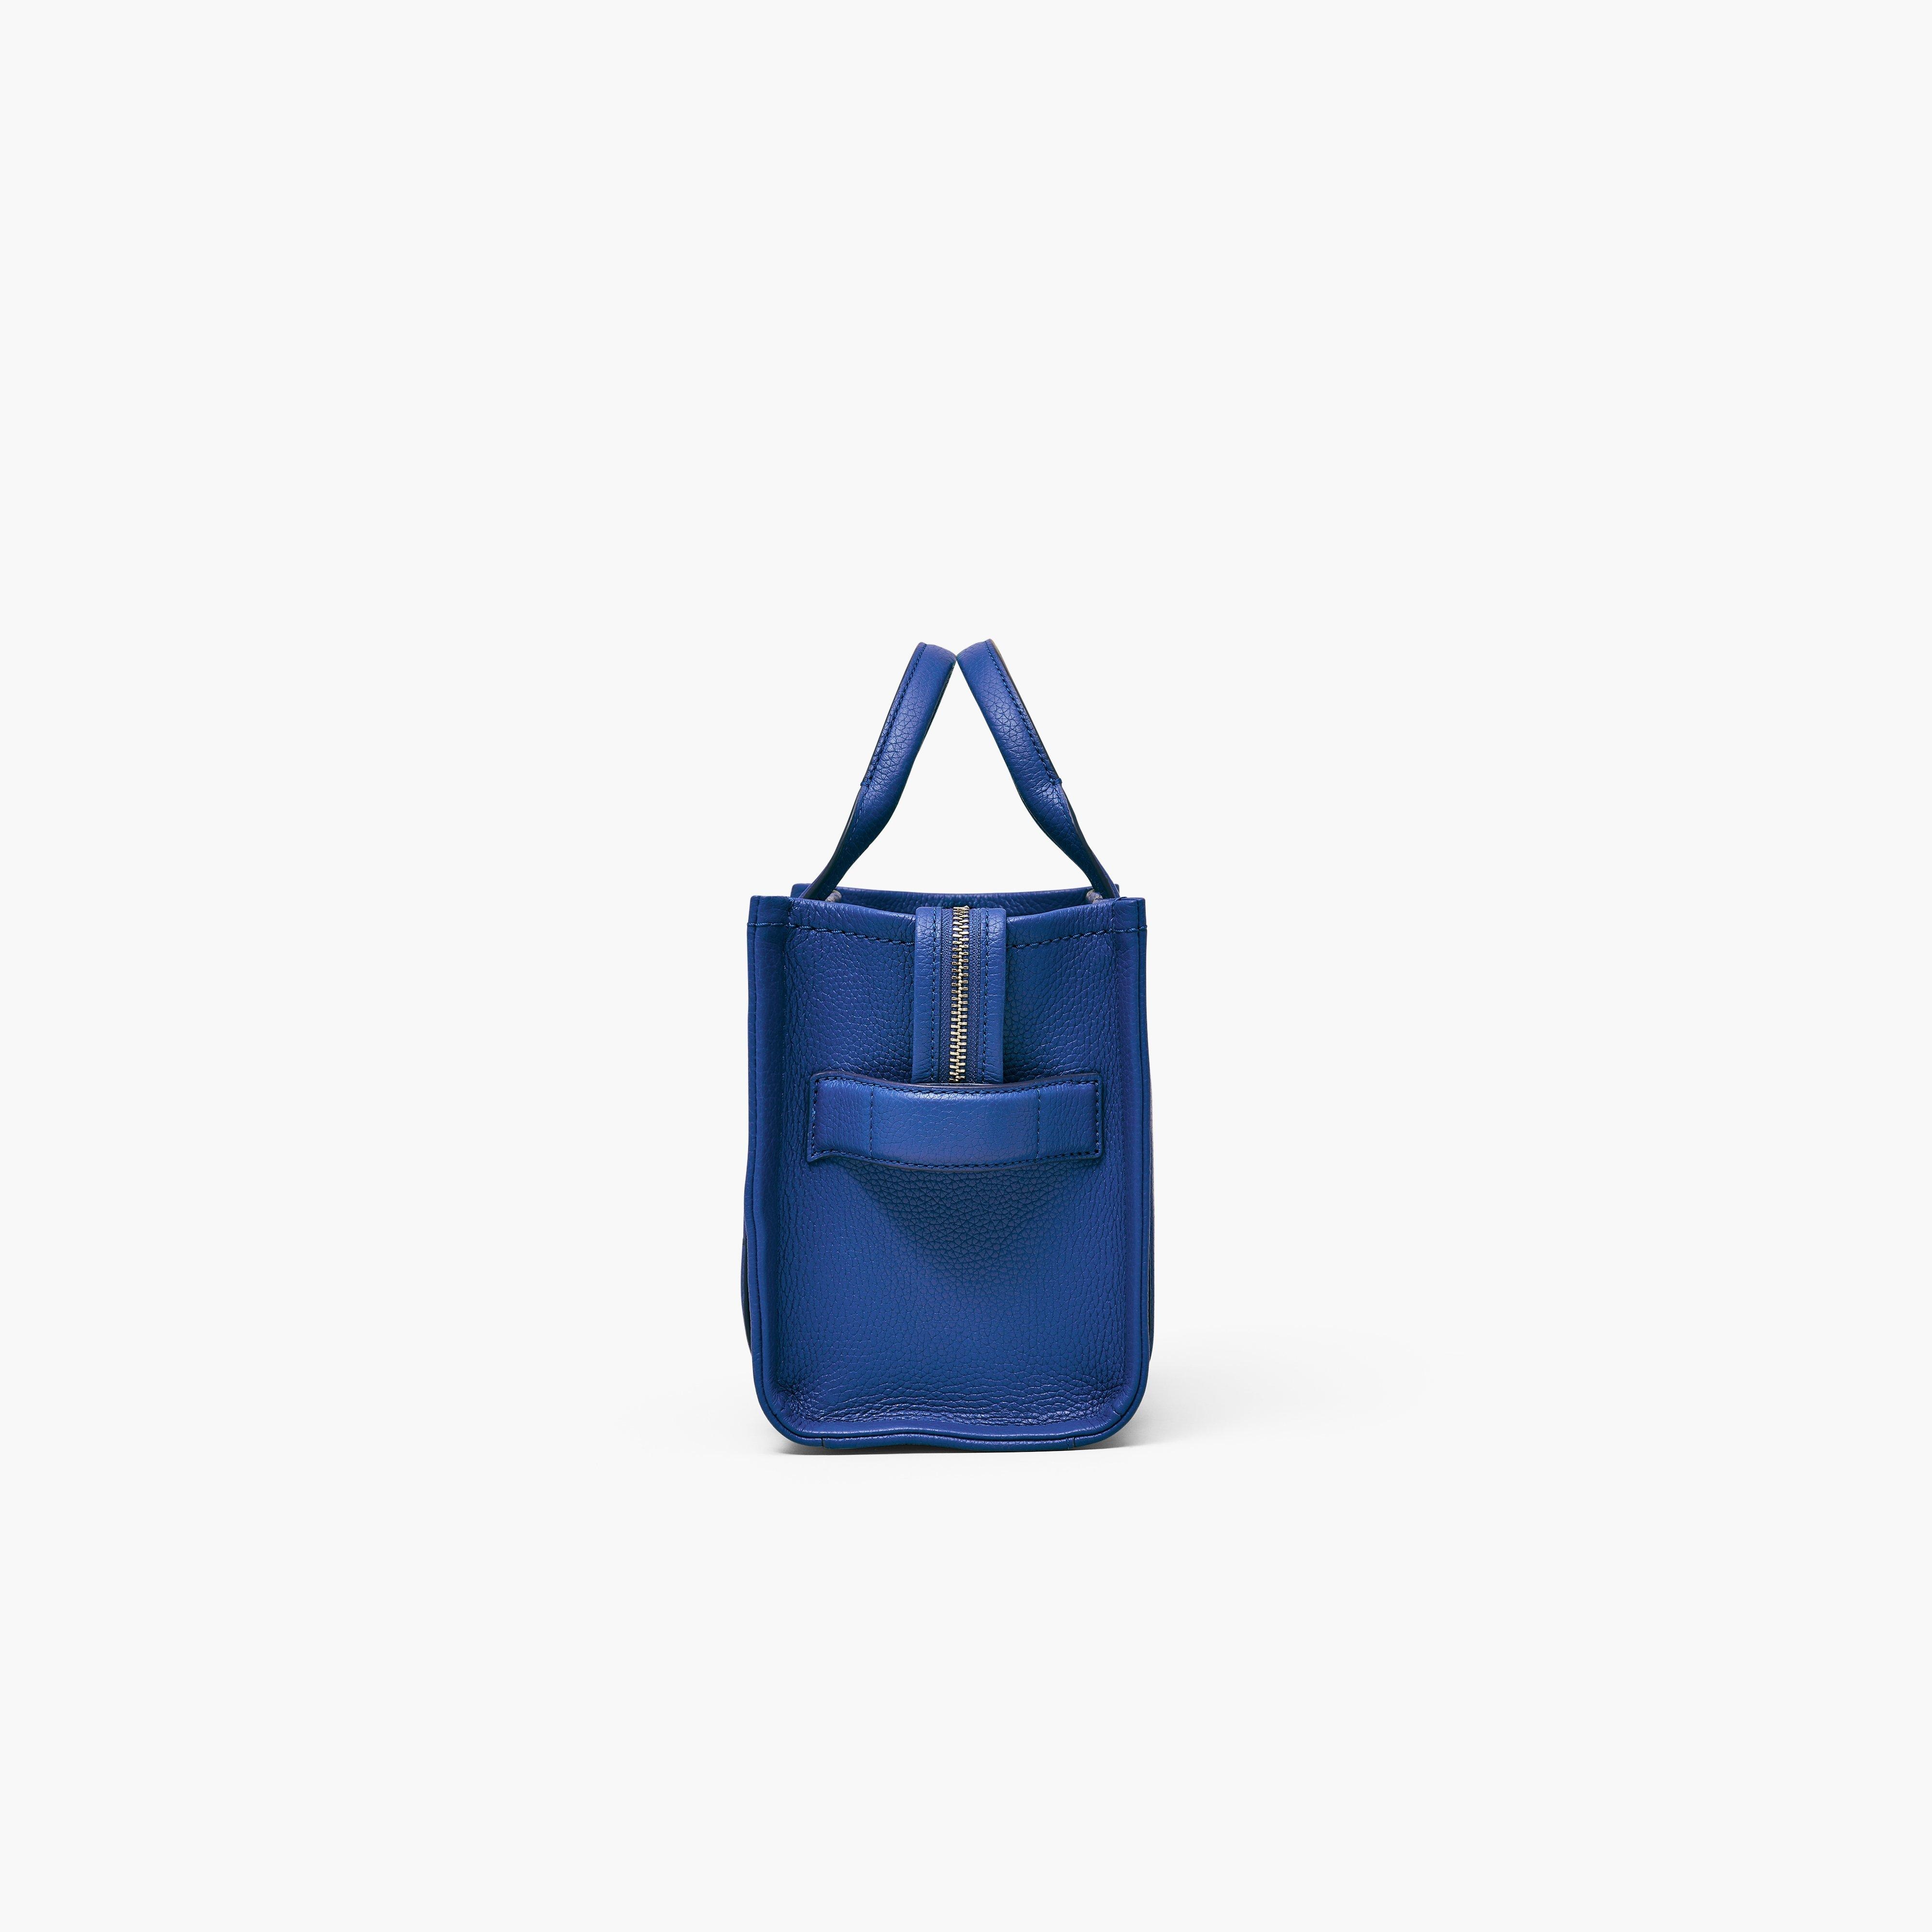 THE LEATHER SMALL TOTE BAG - 3